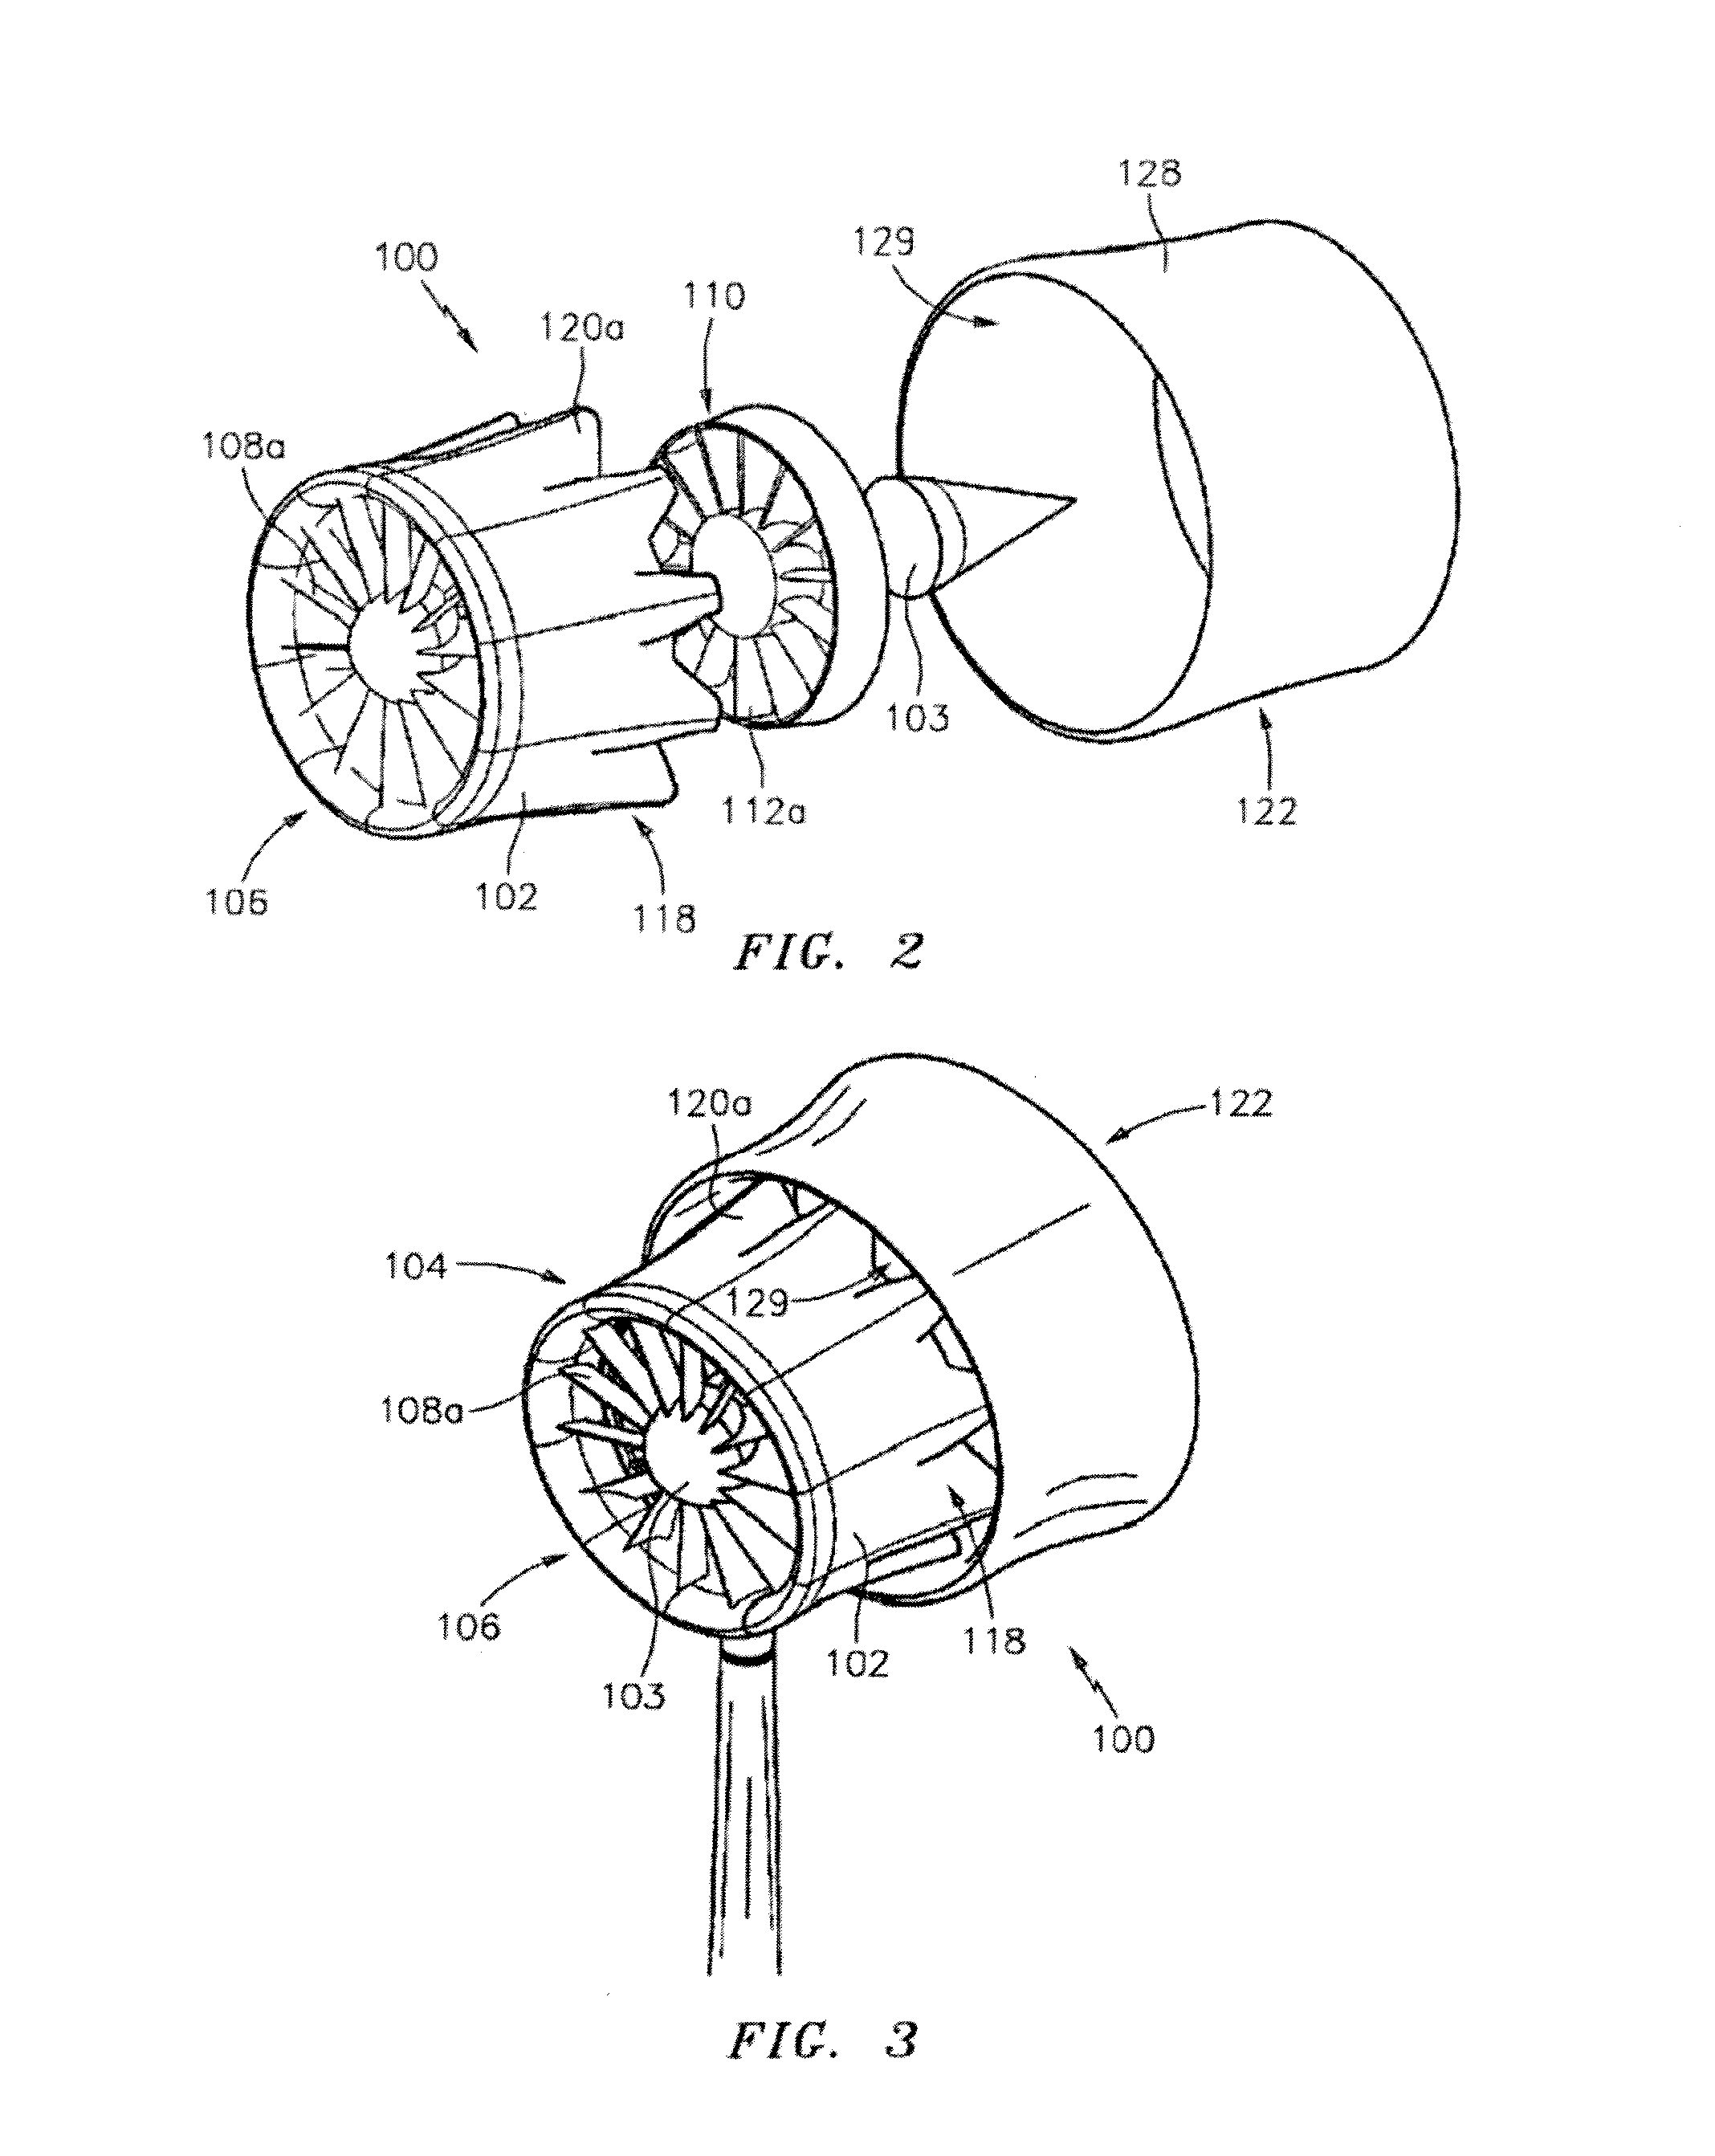 Turbine with mixers and ejectors